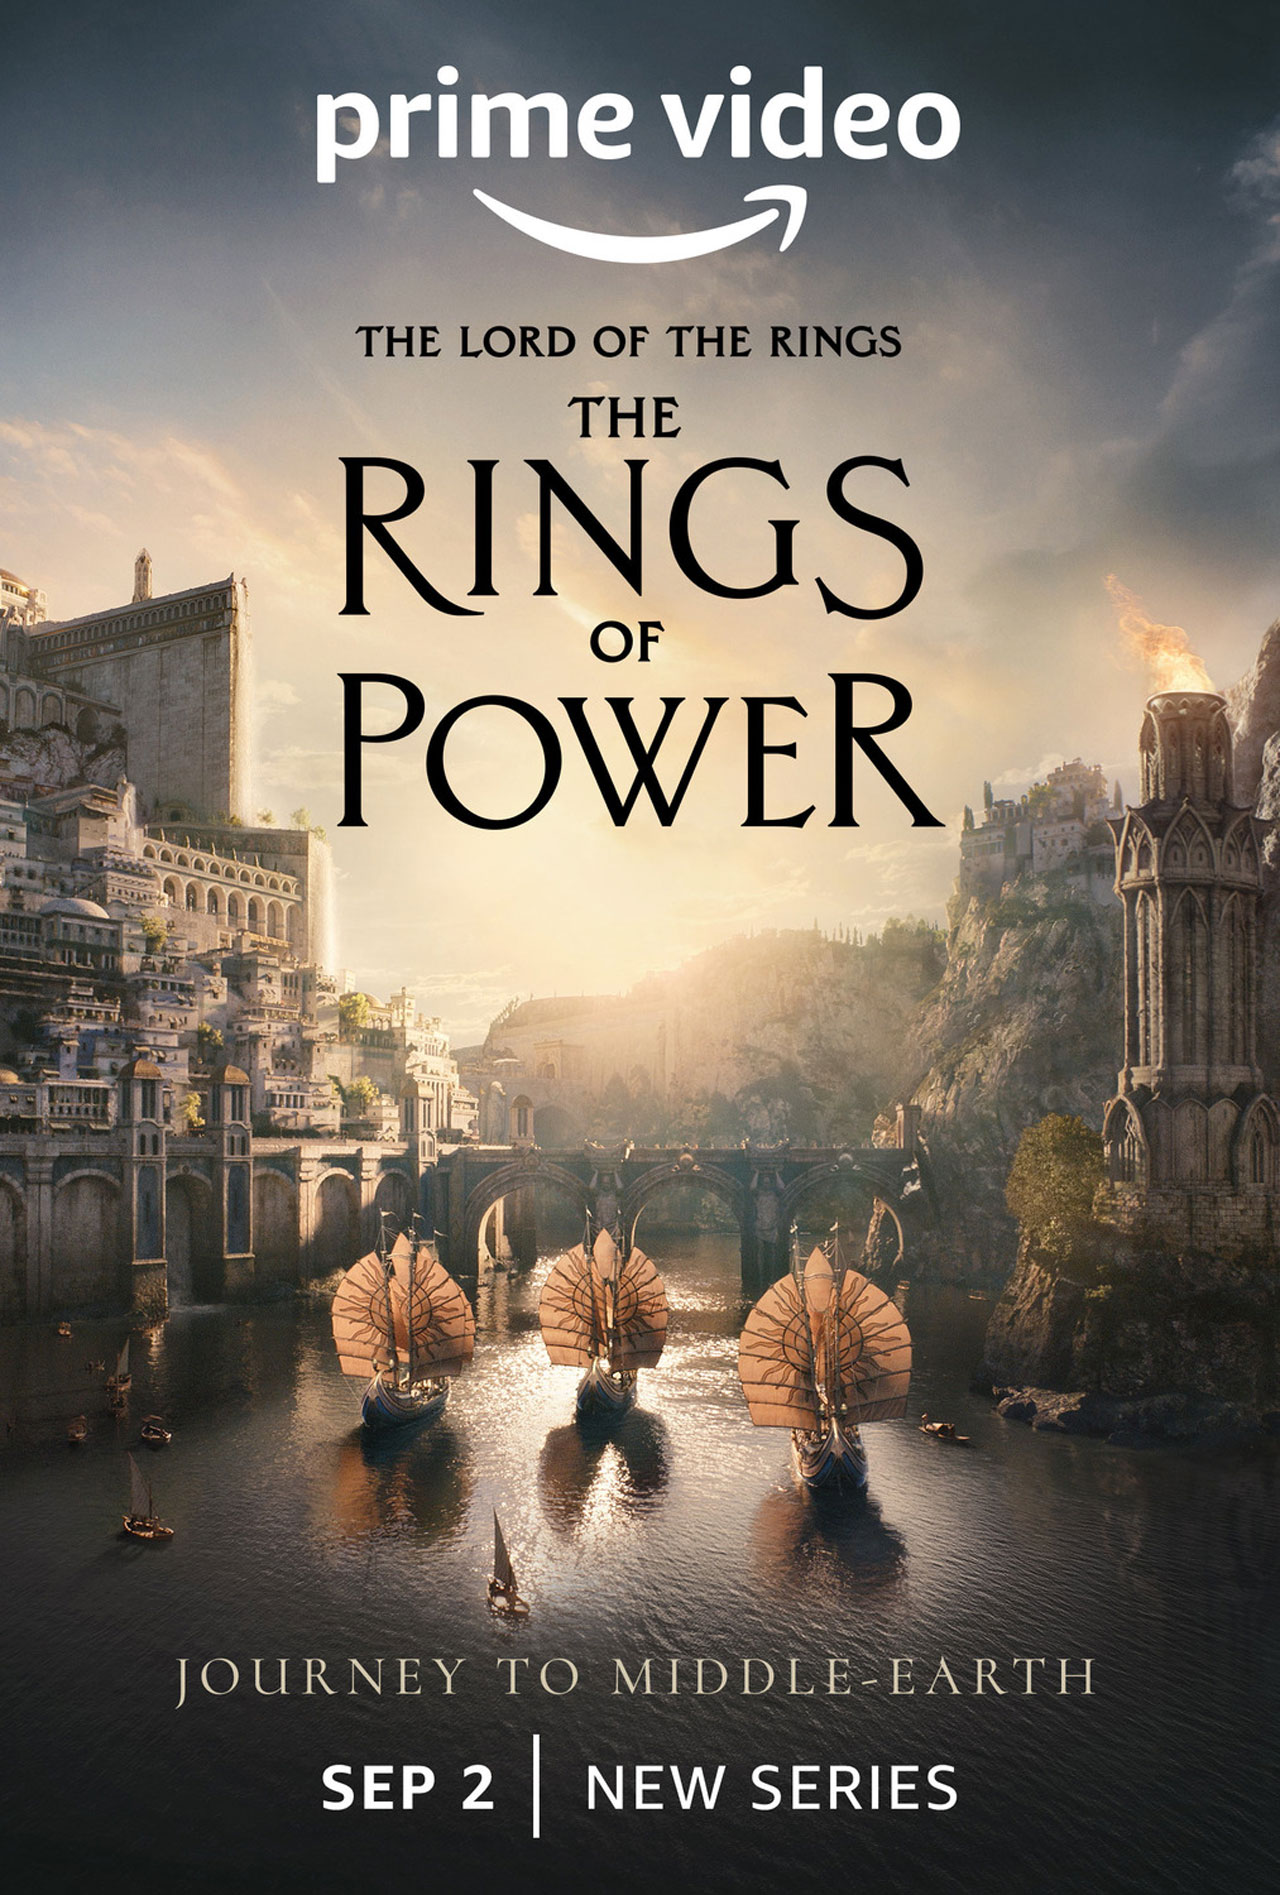 s 'Lord of the Rings' Series Rises: Inside 'The Rings of Power